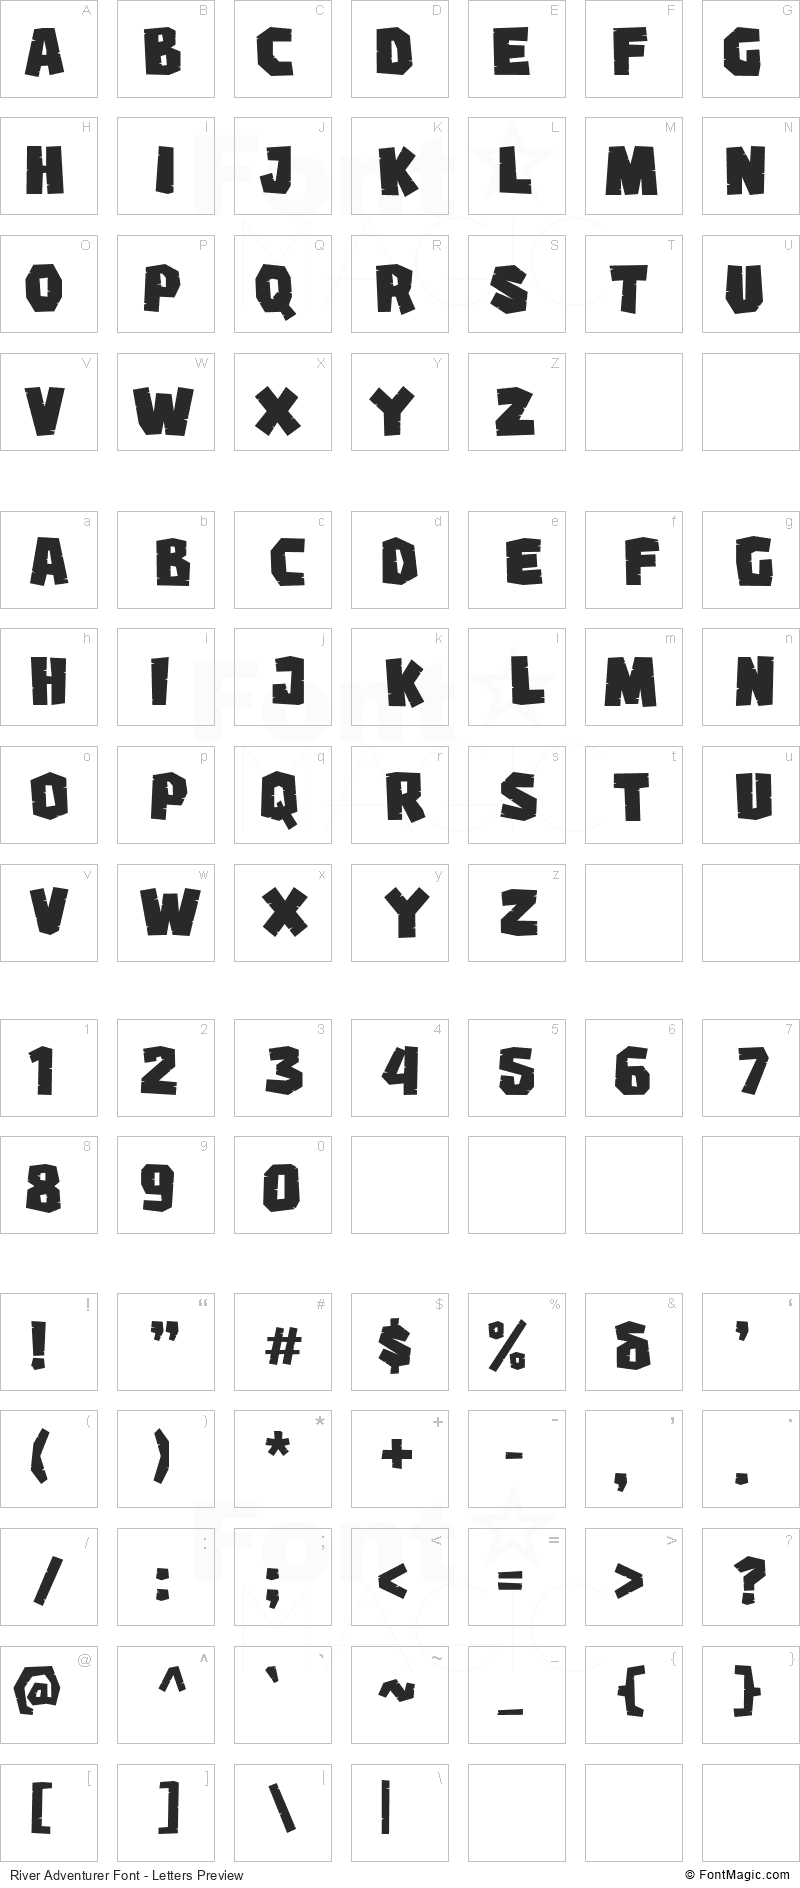 River Adventurer Font - All Latters Preview Chart